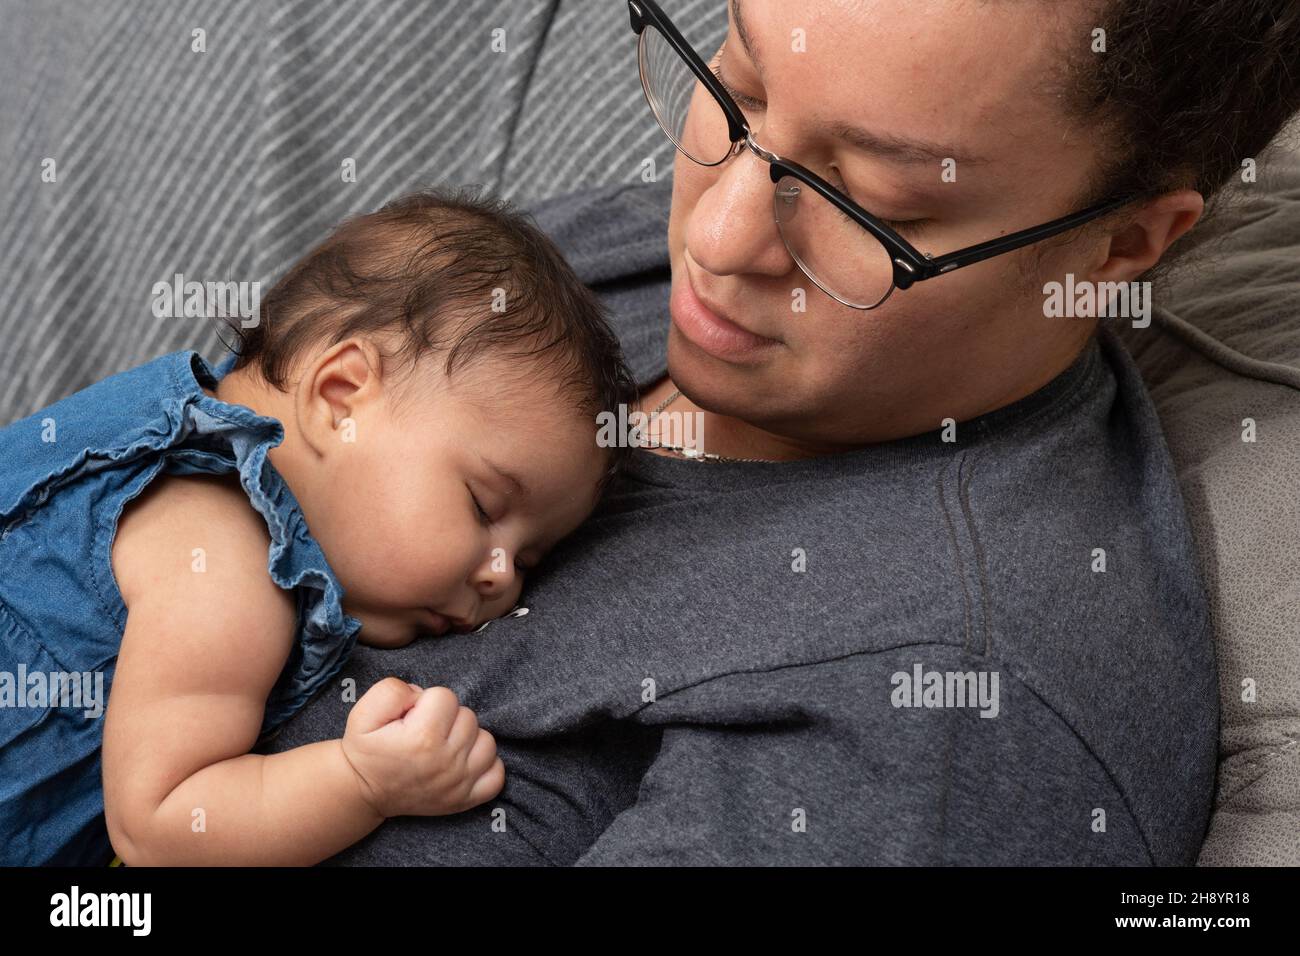 2 month old baby girl (premature) sleeping on chest of caregiver Stock Photo